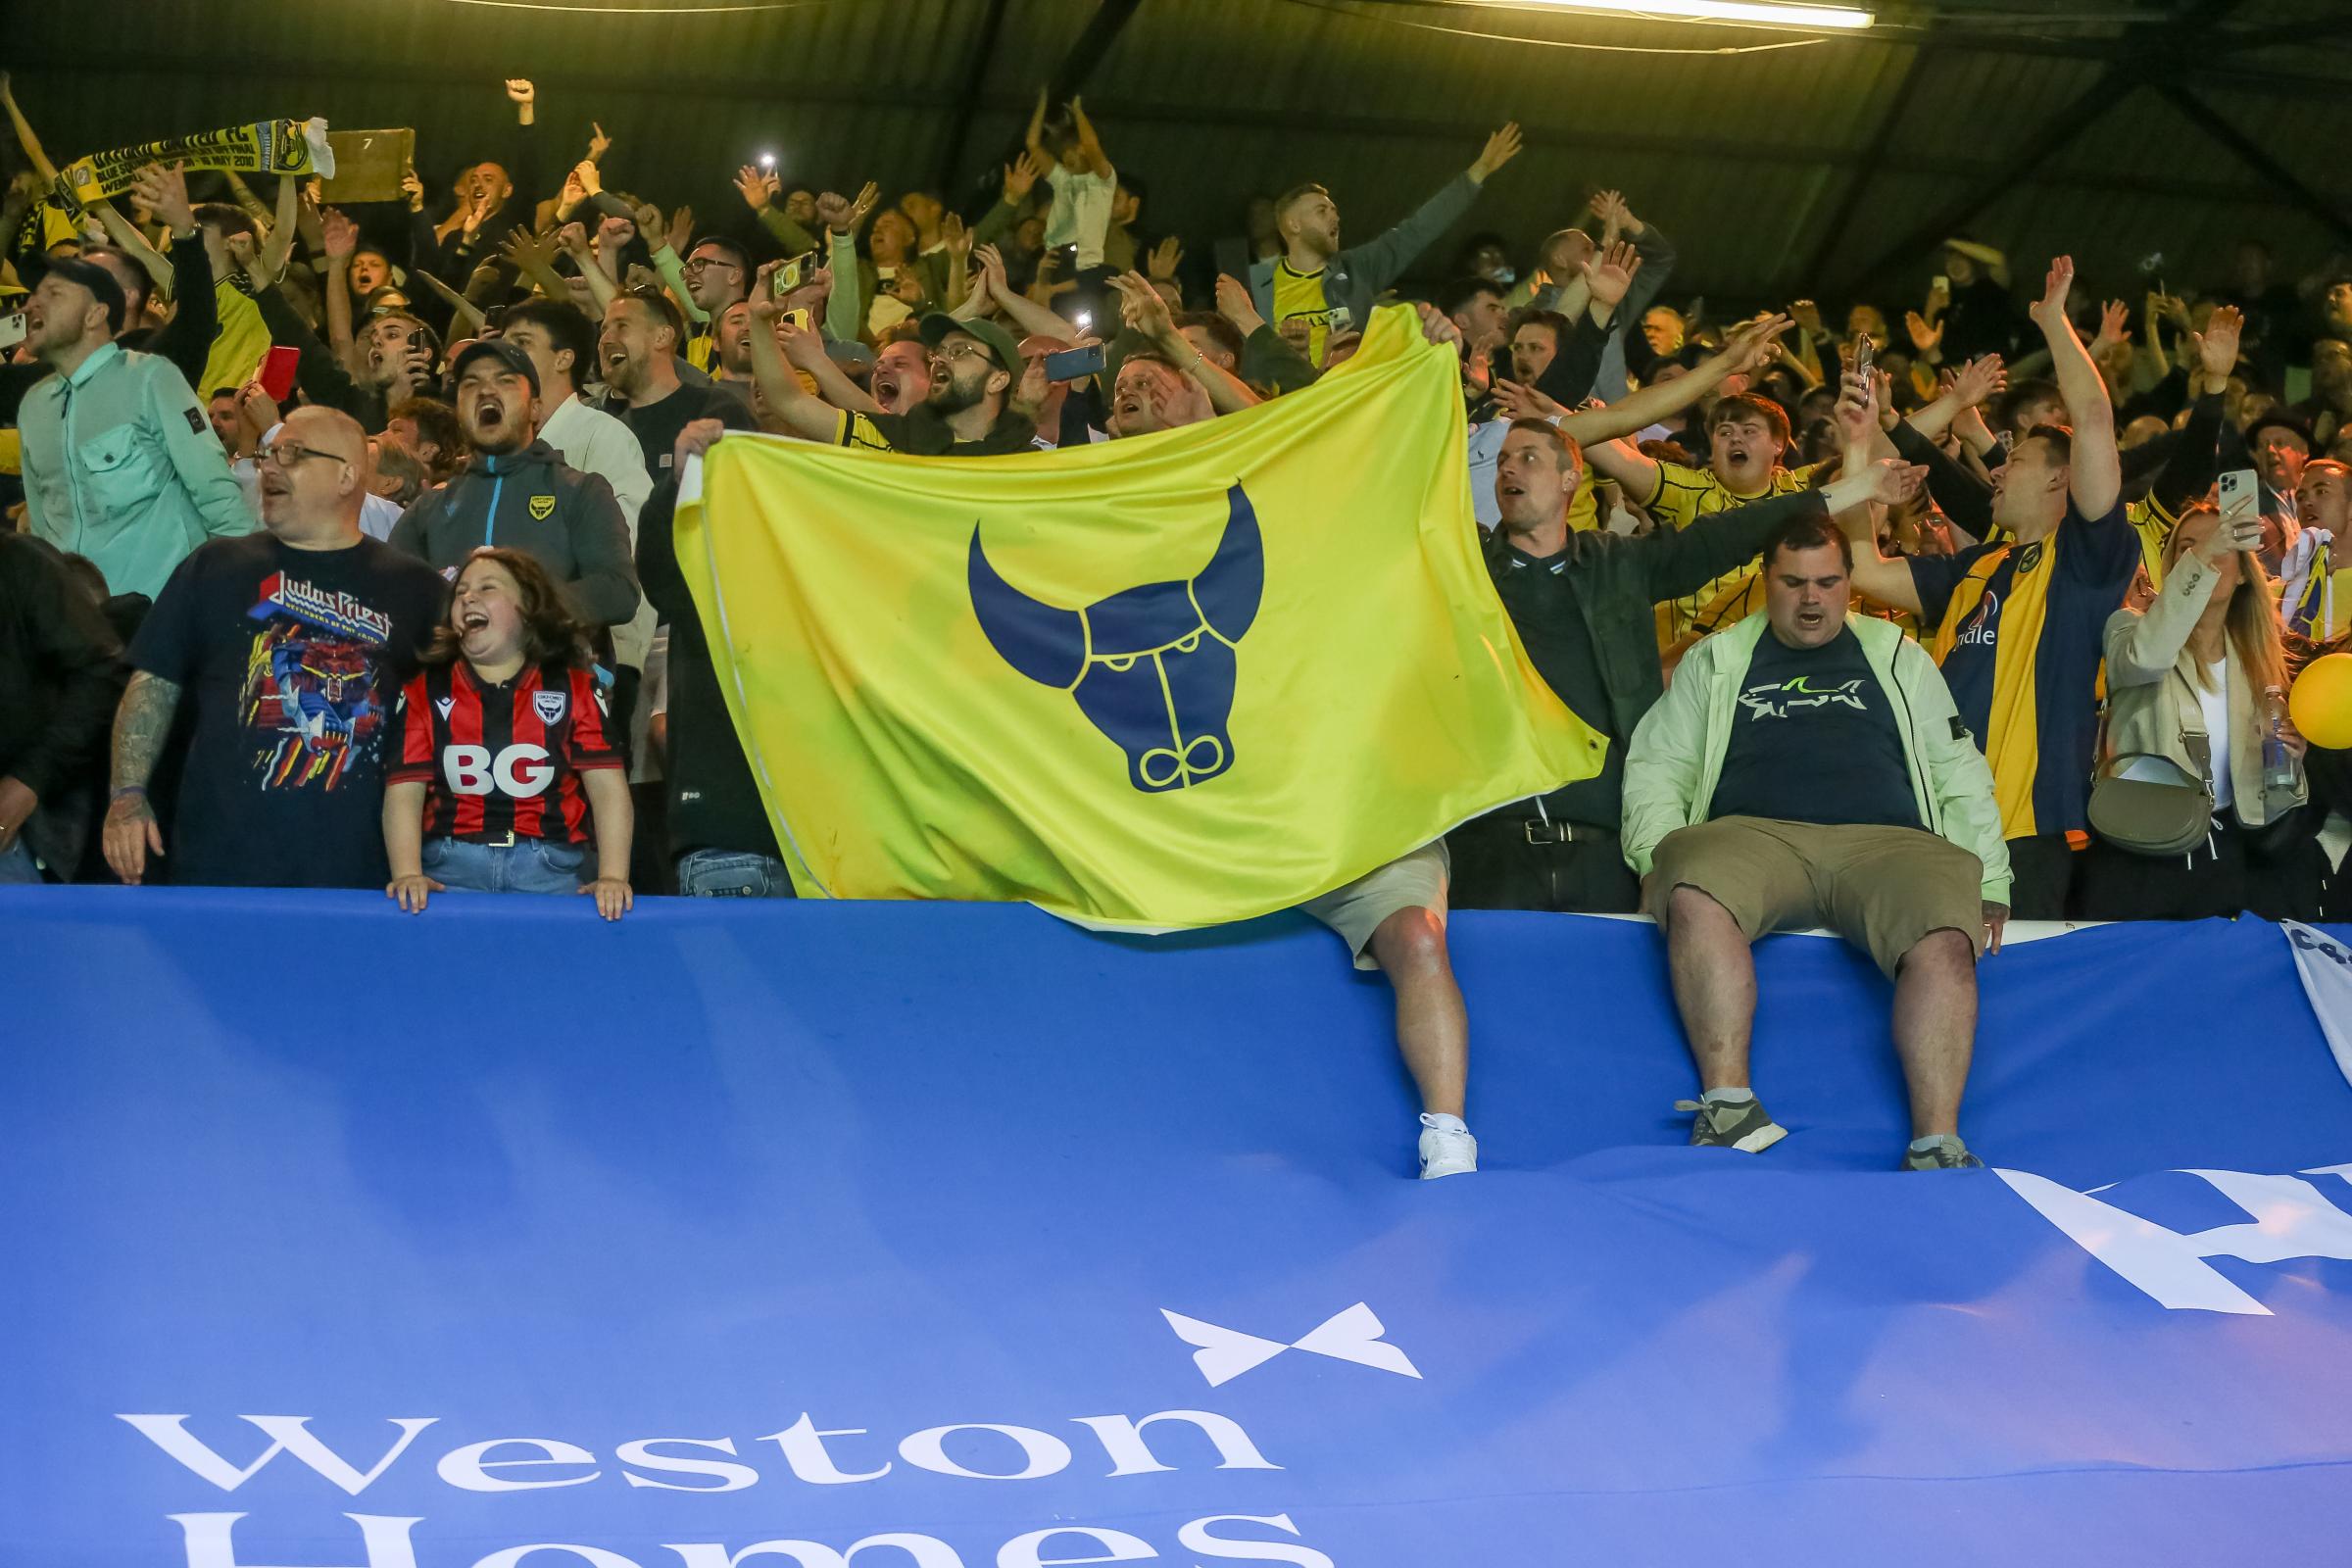 Fan photo gallery as Oxford United book trip to Wembley